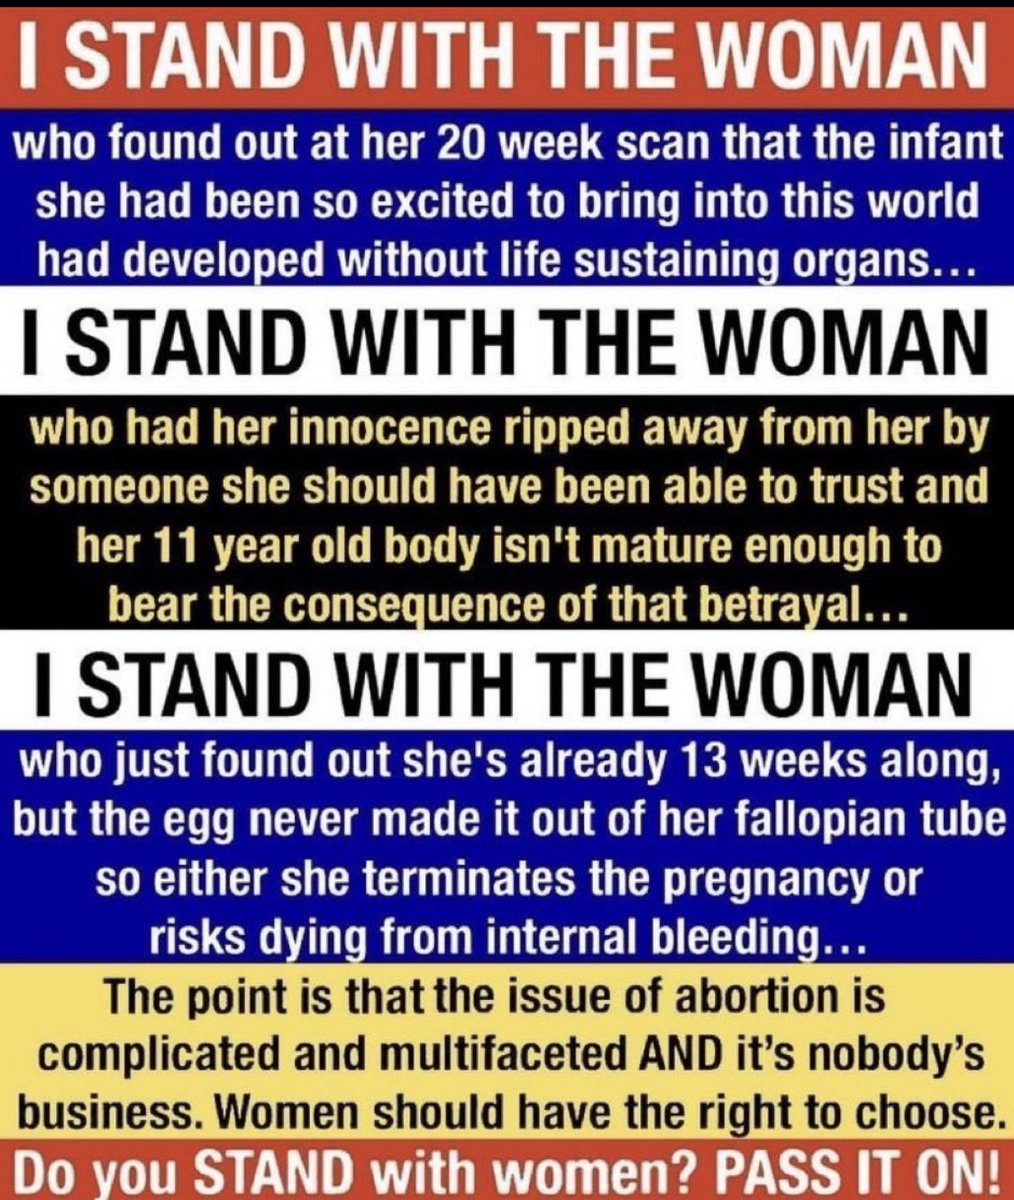 #abortionishealthcare #Cult45 is our DEMISE #RESIST #VOTE 💙💙💙💙